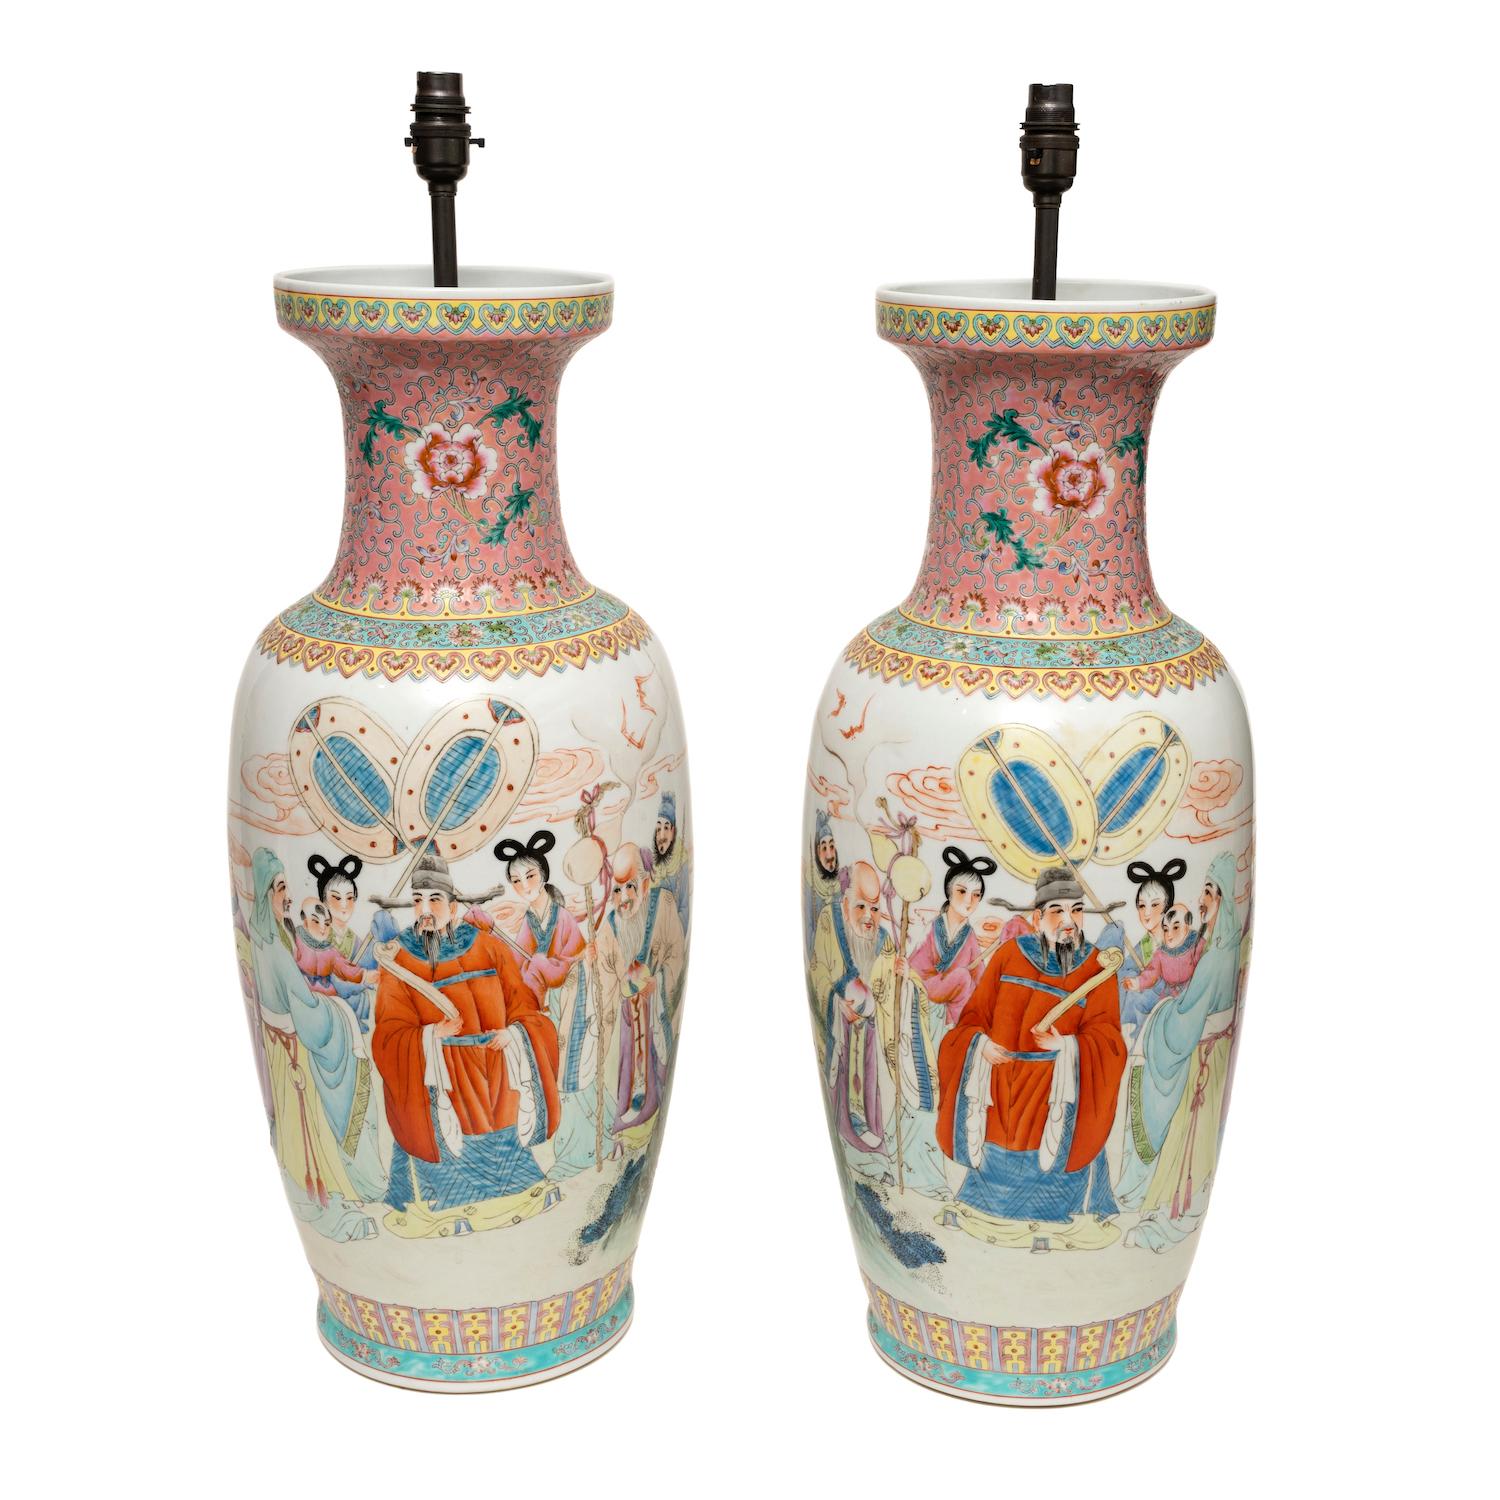 MASSIVE, PAIR OF VINTAGE, CHINOISERIE, PORCELAIN VASES, UPCYCLED INTO TABLE LAMPS, 70cm., 27½” high
The massive size is softened by the pastel shades of pink, yellow, blue, green.
The form of the vases is fluid and soft.
Painted with a ceremony with